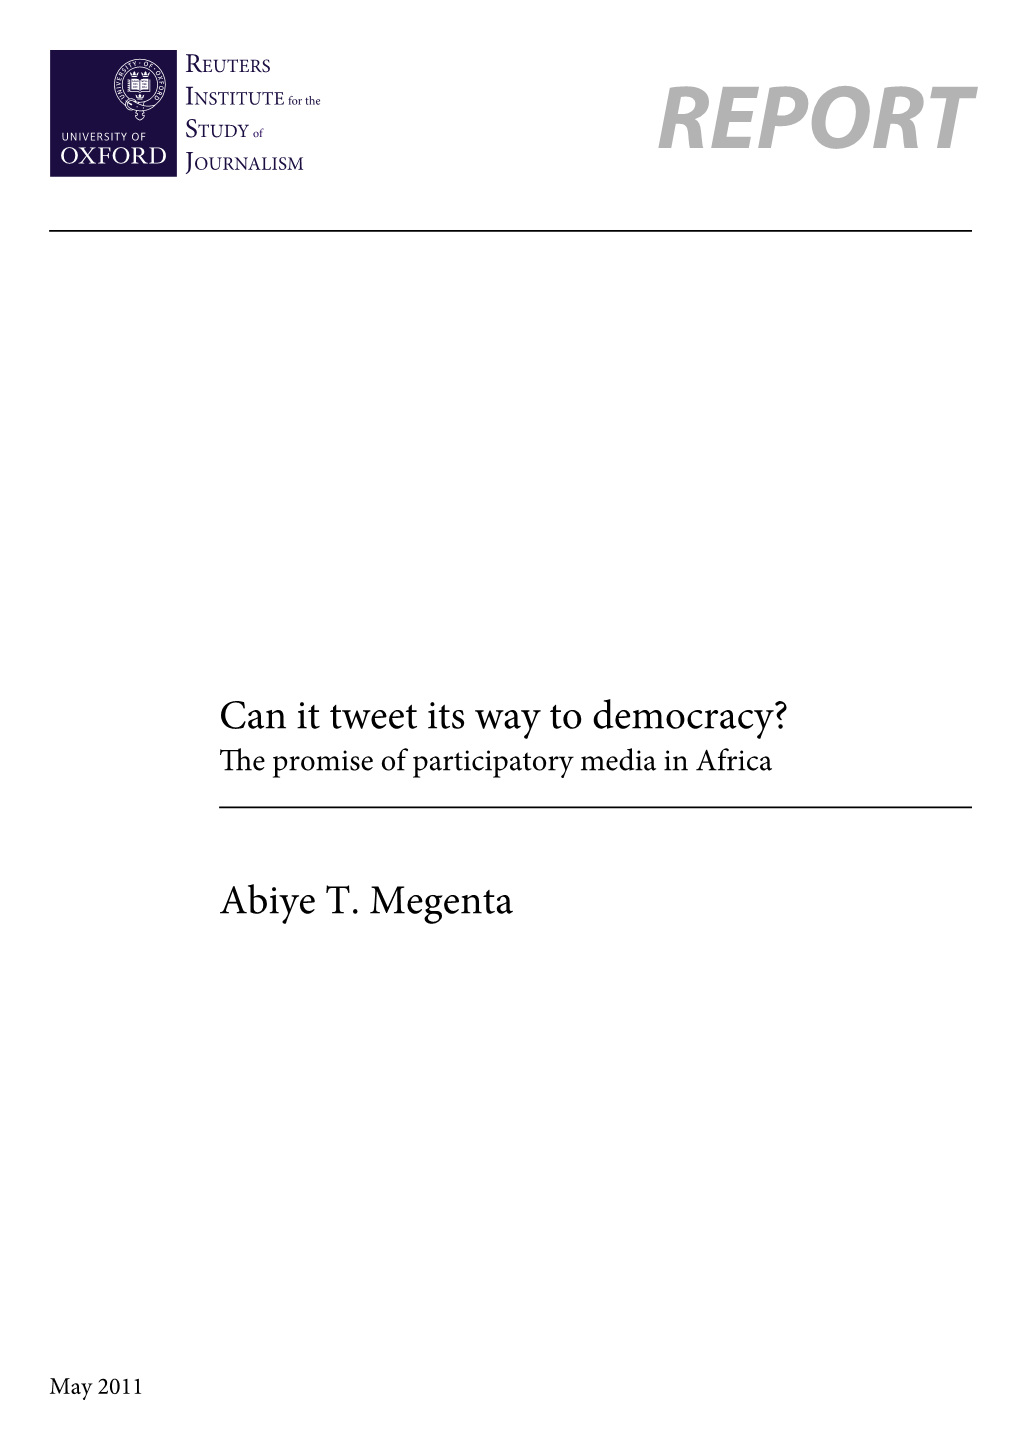 Can It Tweet Its Way to Democracy? E Promise of Participatory Media in Africa